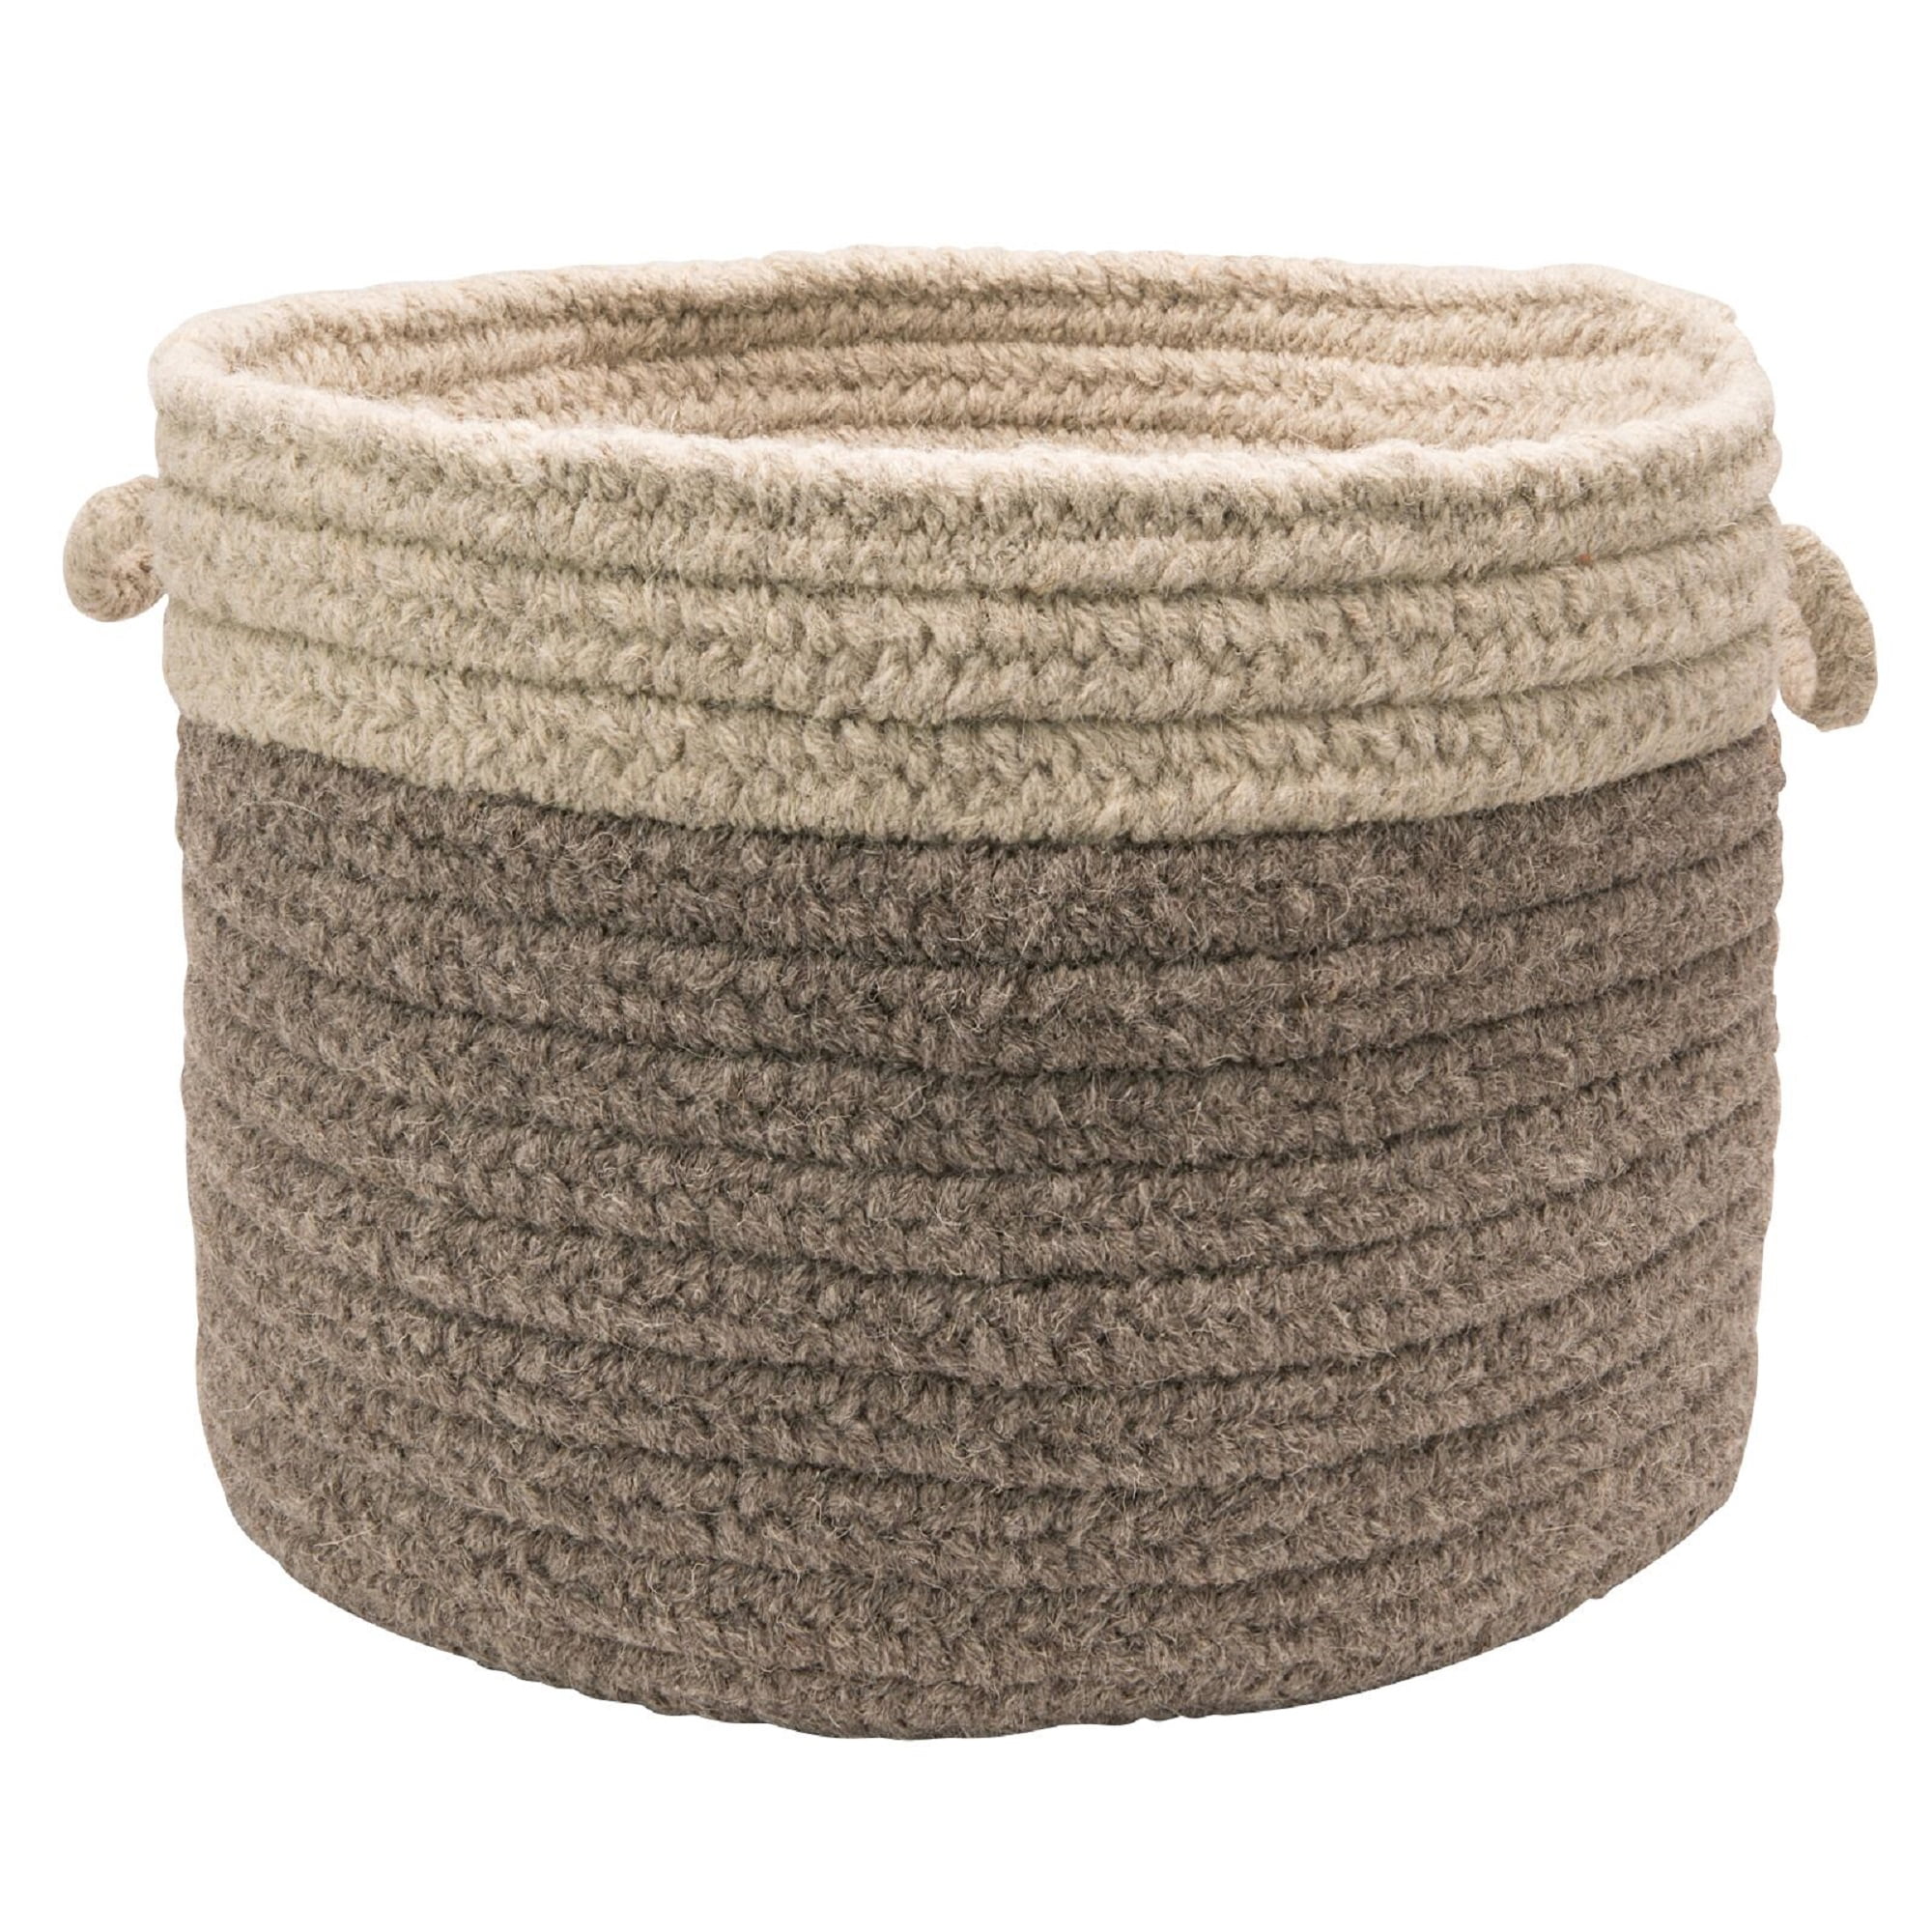 Picture of Colonial Mills CN21A014X010 Chunky Natural Wool Dipped Basket, Dark Gray & Light Gray